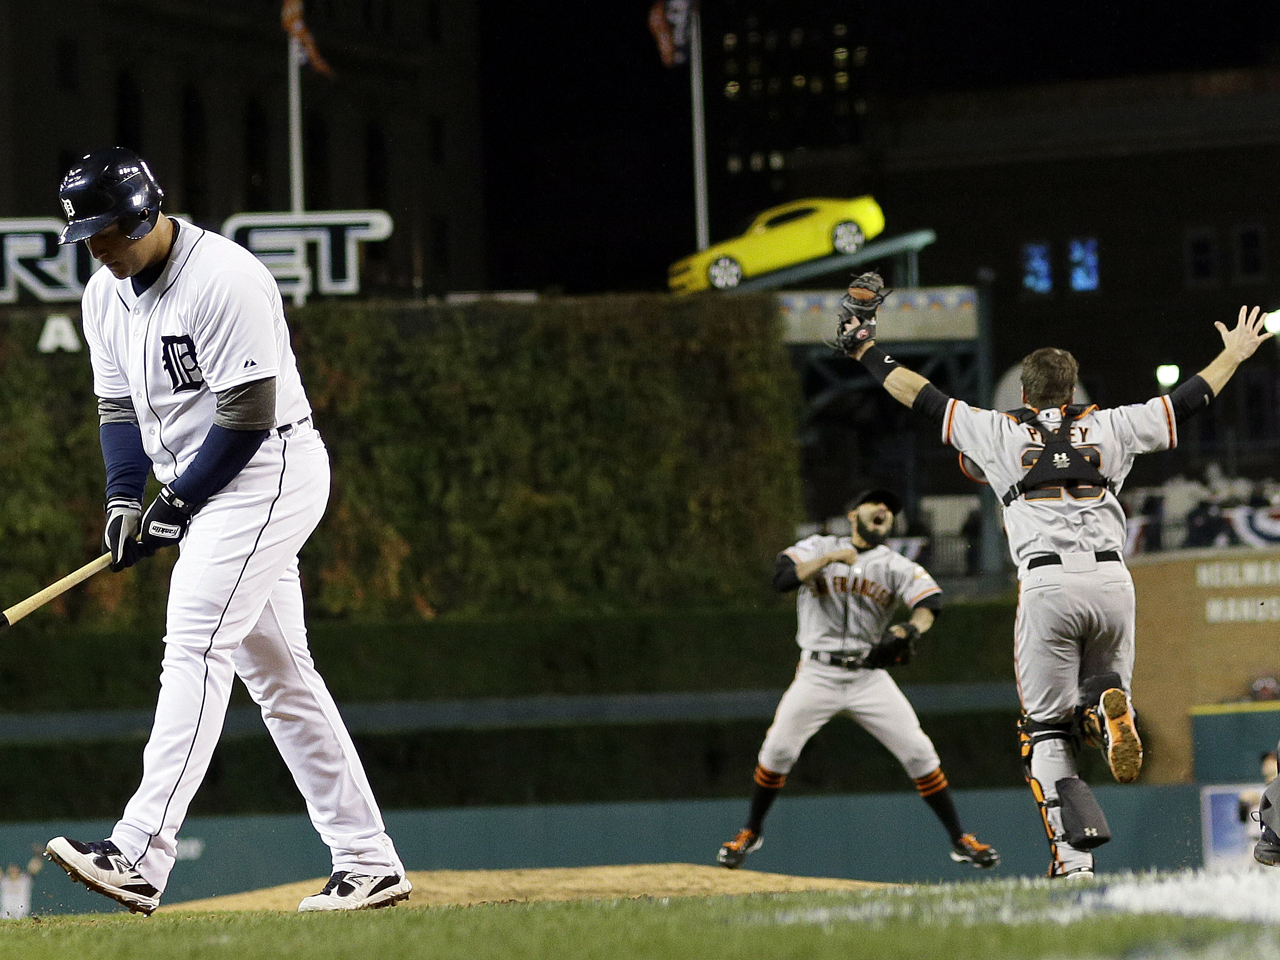 San Francisco Giants sweep Detroit Tigers for World Series - CBS News